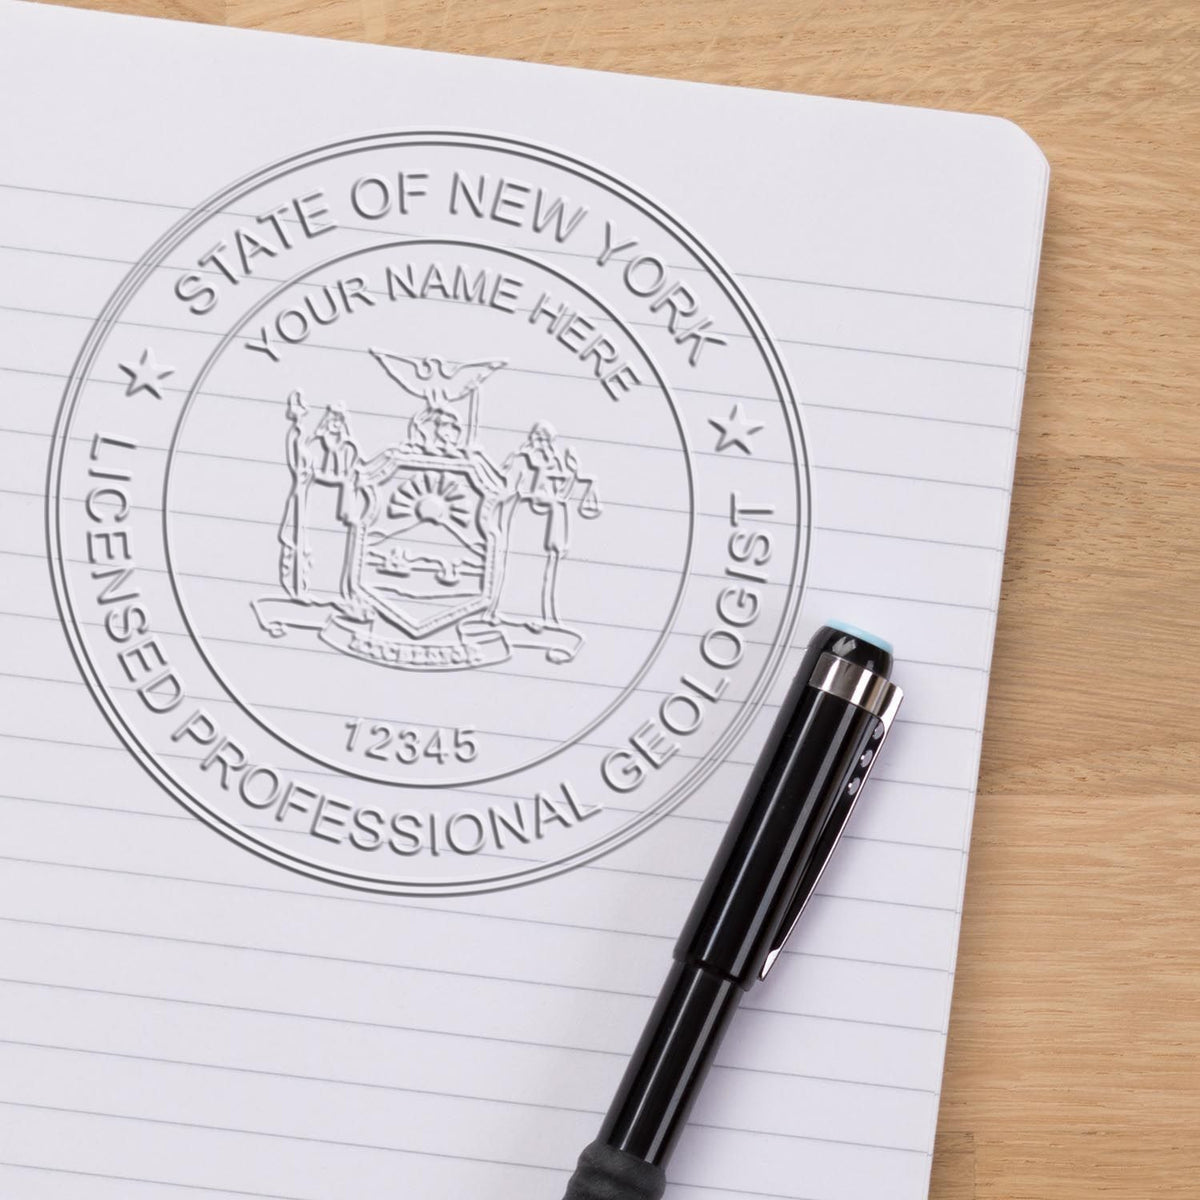 A photograph of the Gift New York Geologist Seal stamp impression reveals a vivid, professional image of the on paper.